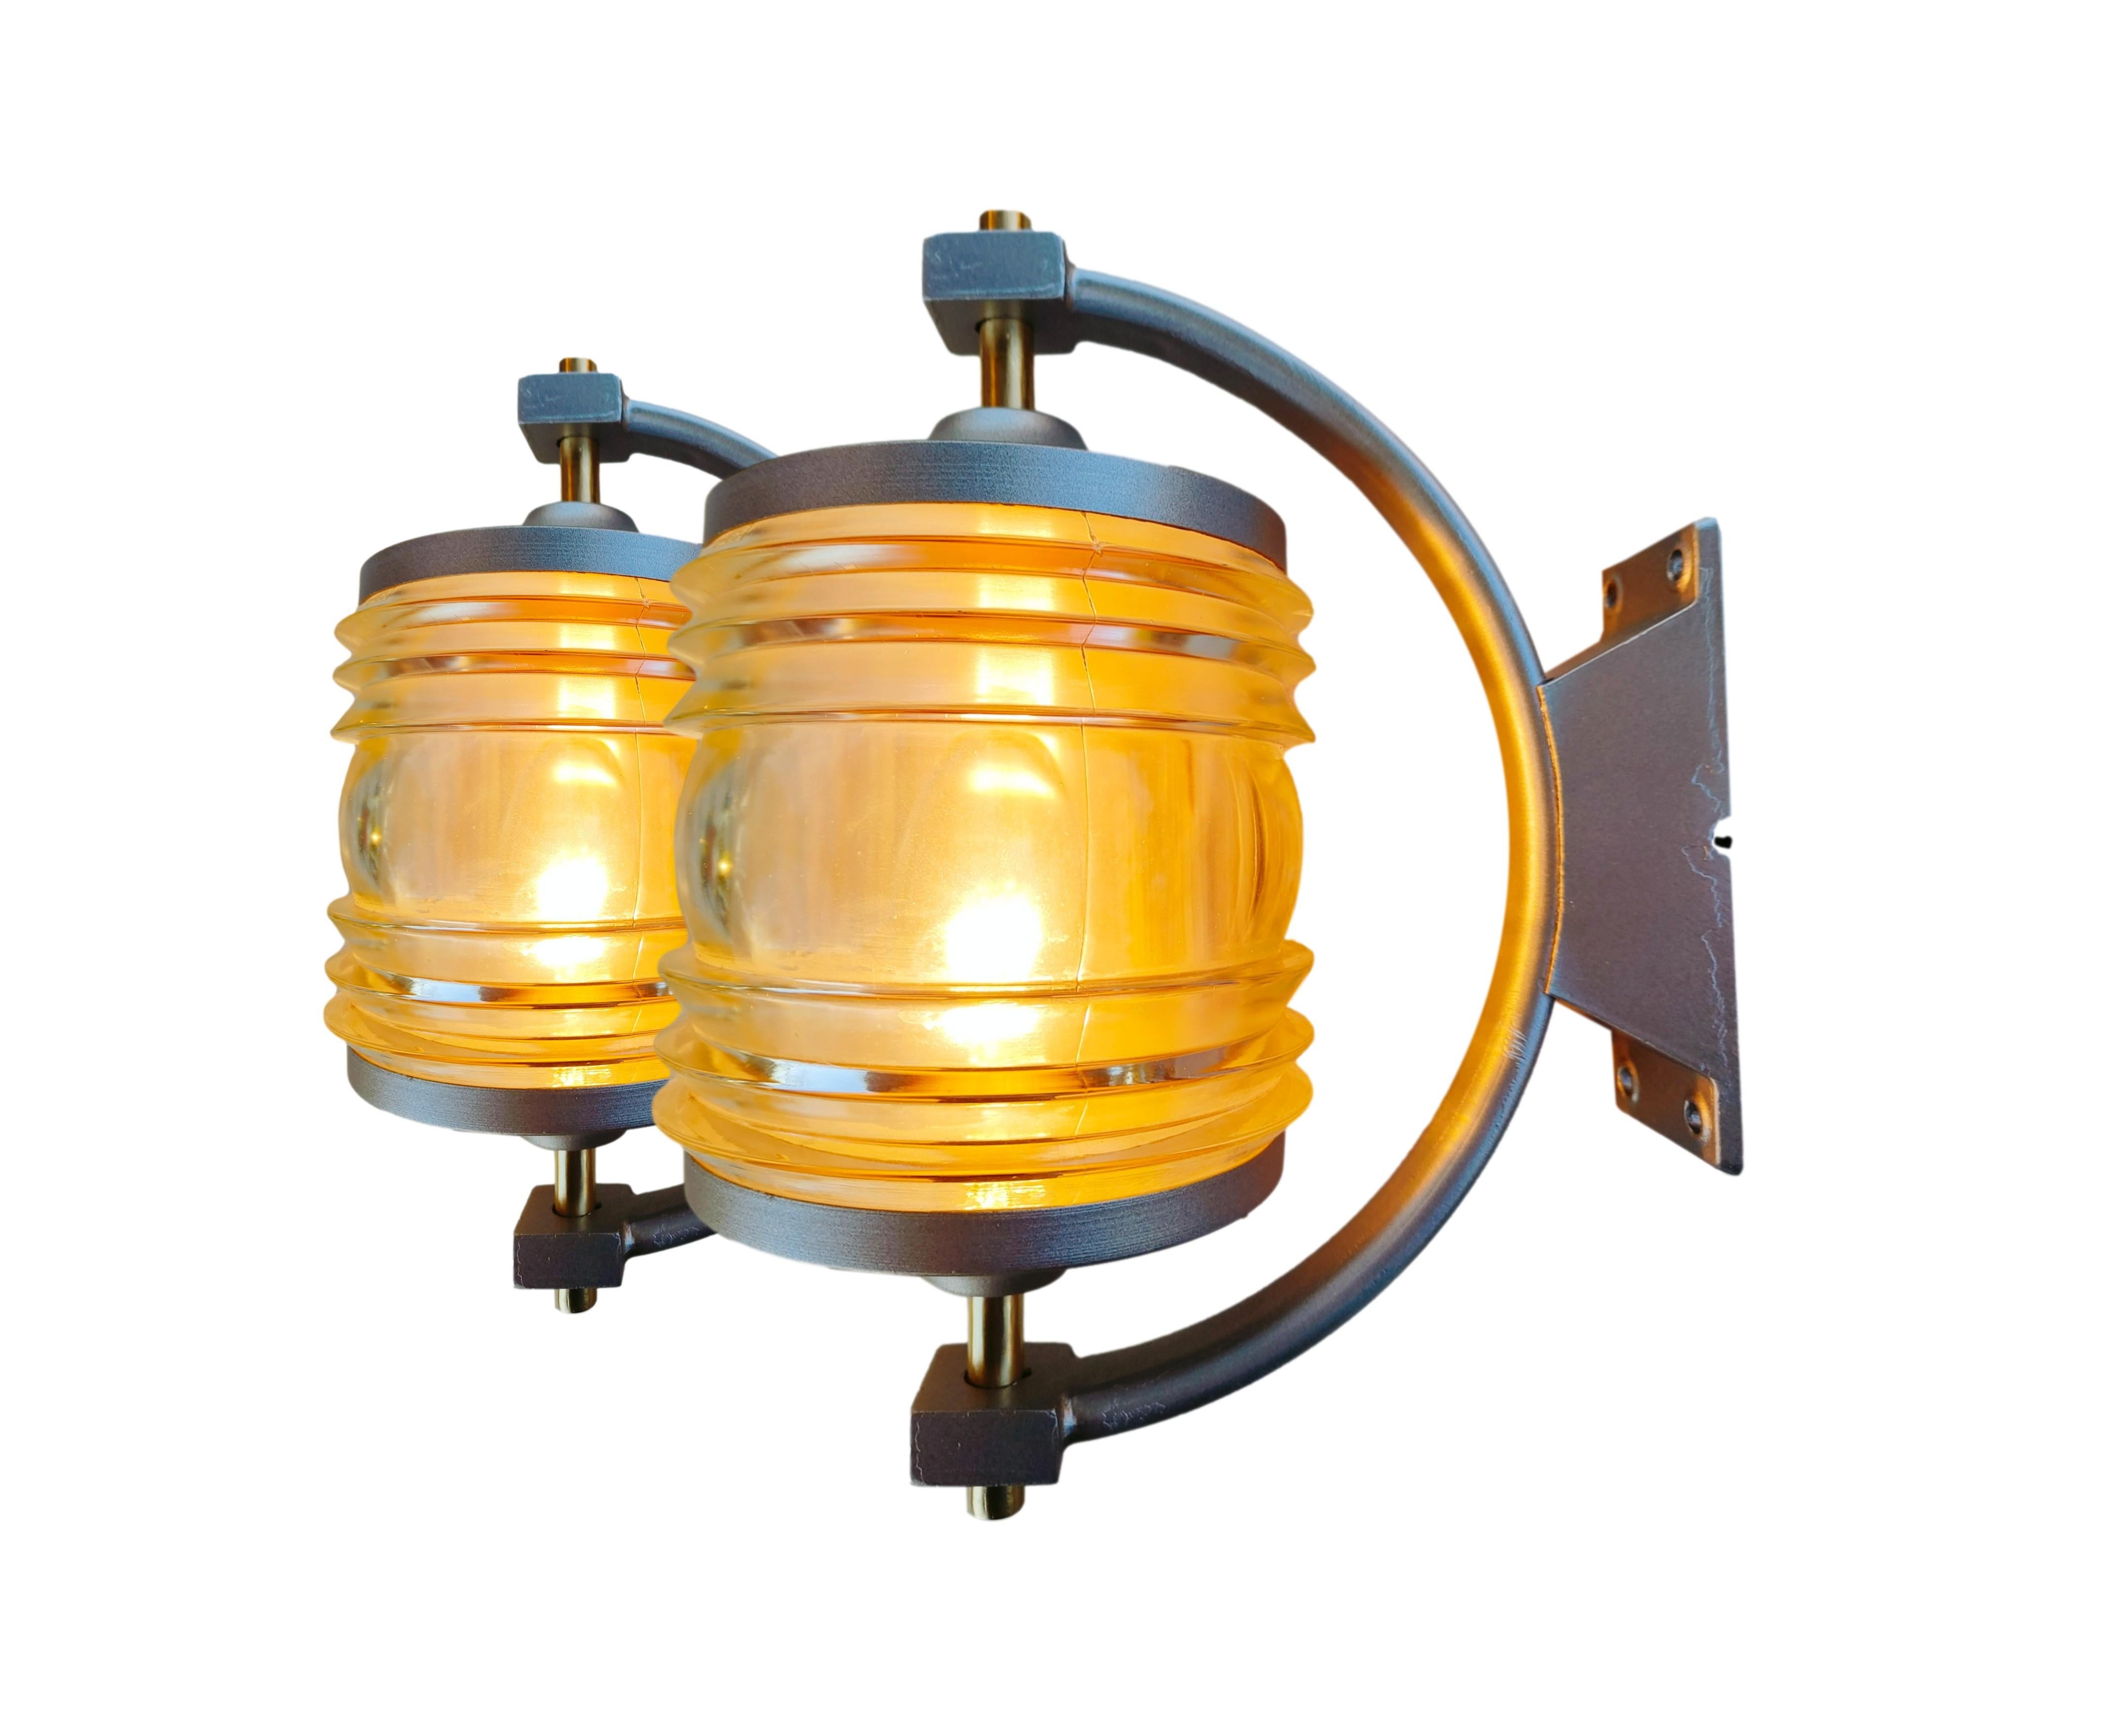 Industrial Old Marine & Nautical Ship Sconces Wall Lamps Fresnel Lenses Glass Colombo Style